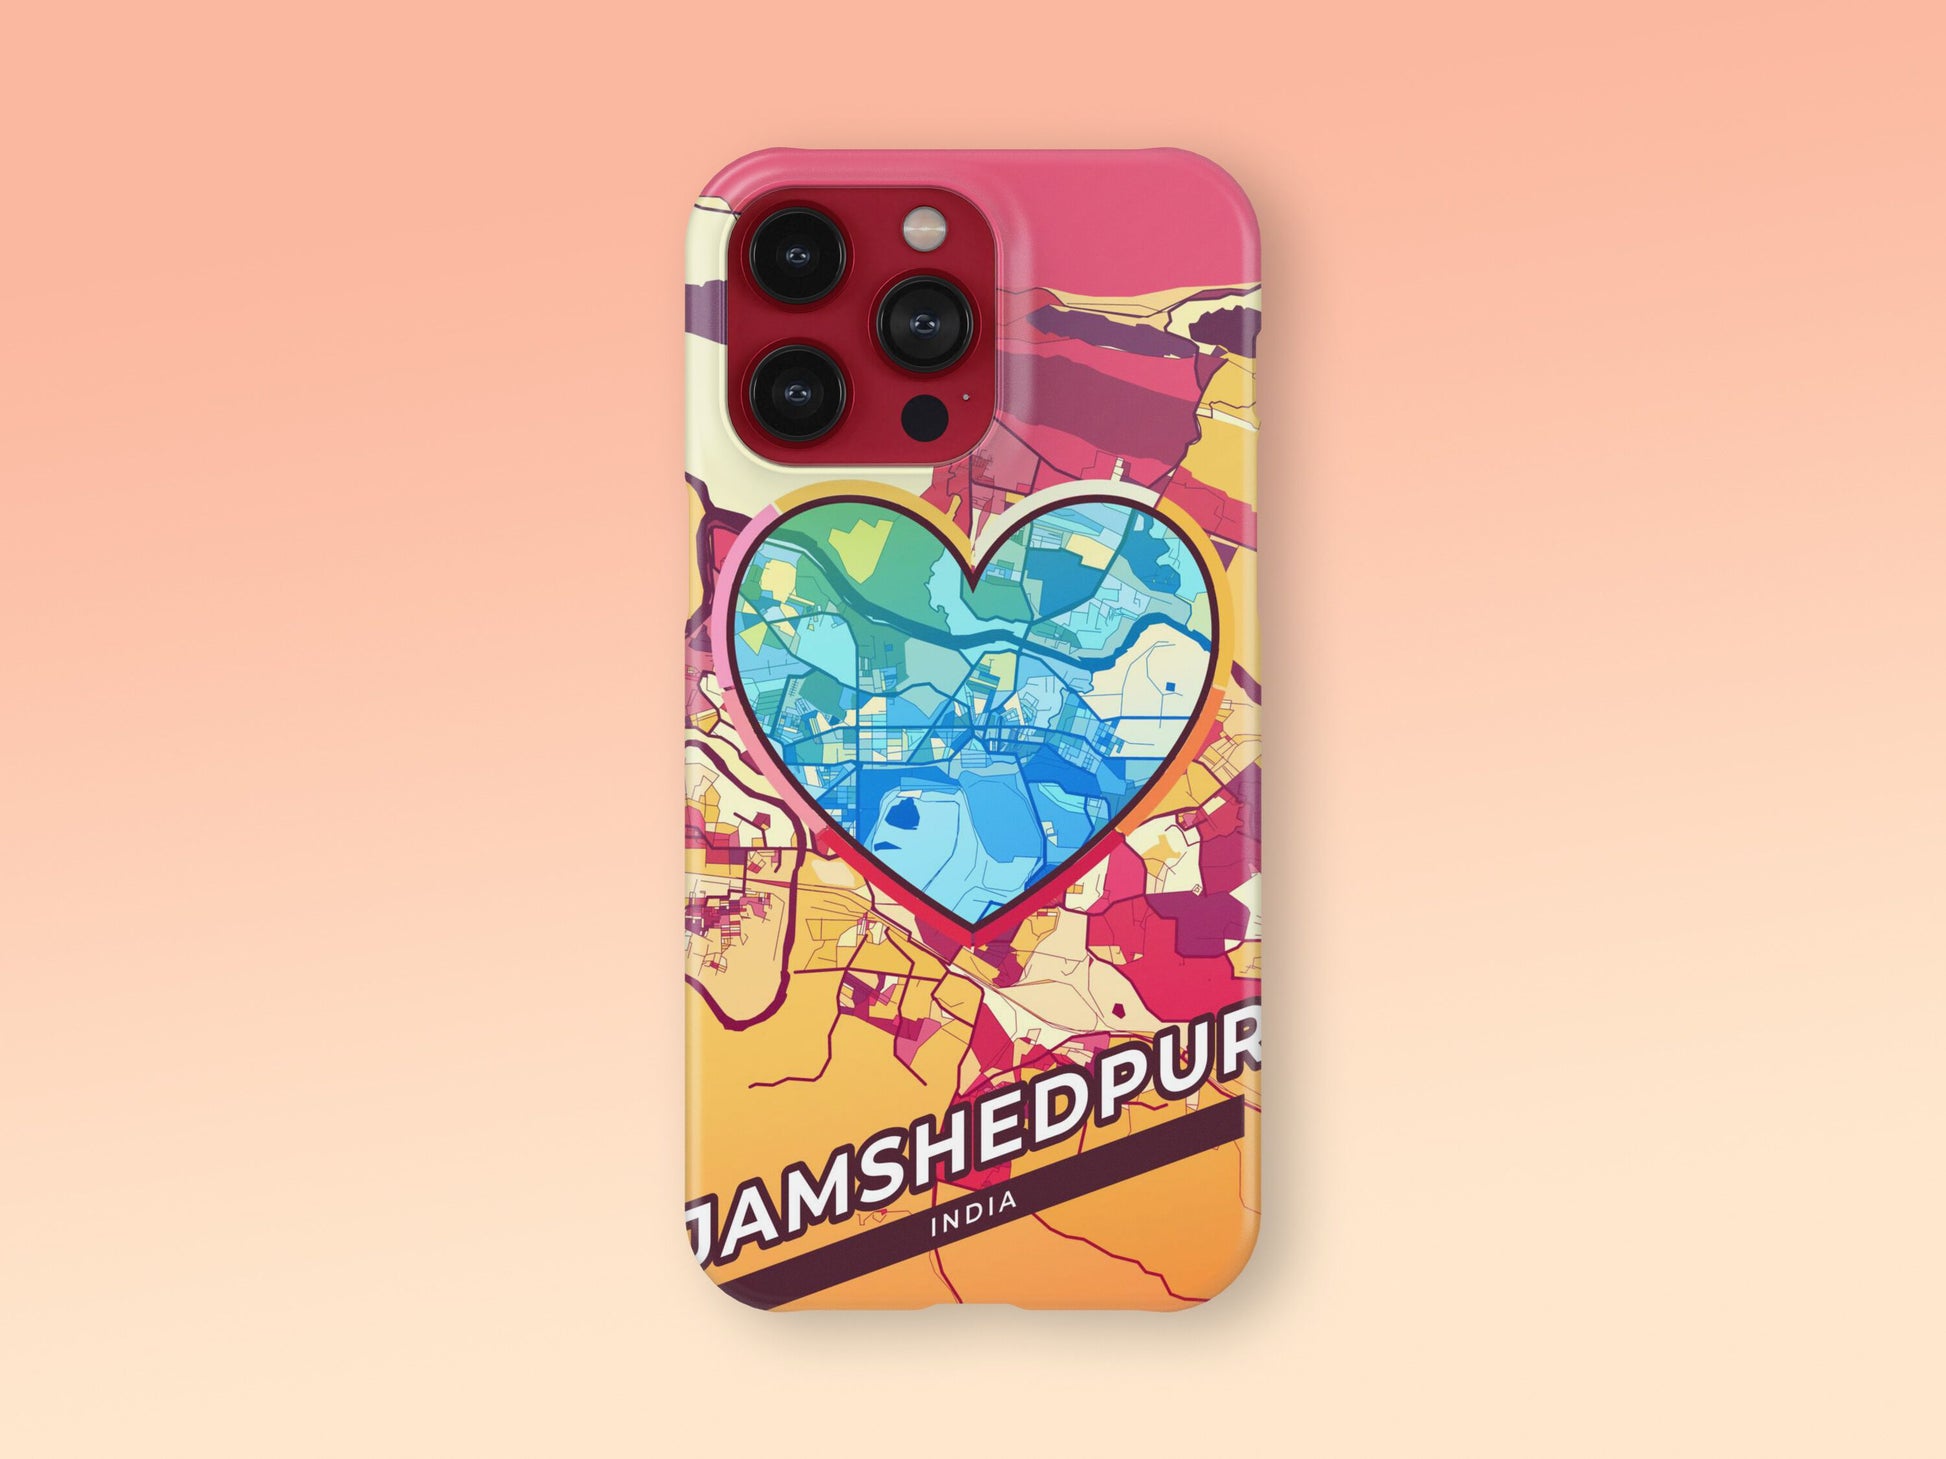 Jamshedpur India slim phone case with colorful icon. Birthday, wedding or housewarming gift. Couple match cases. 2